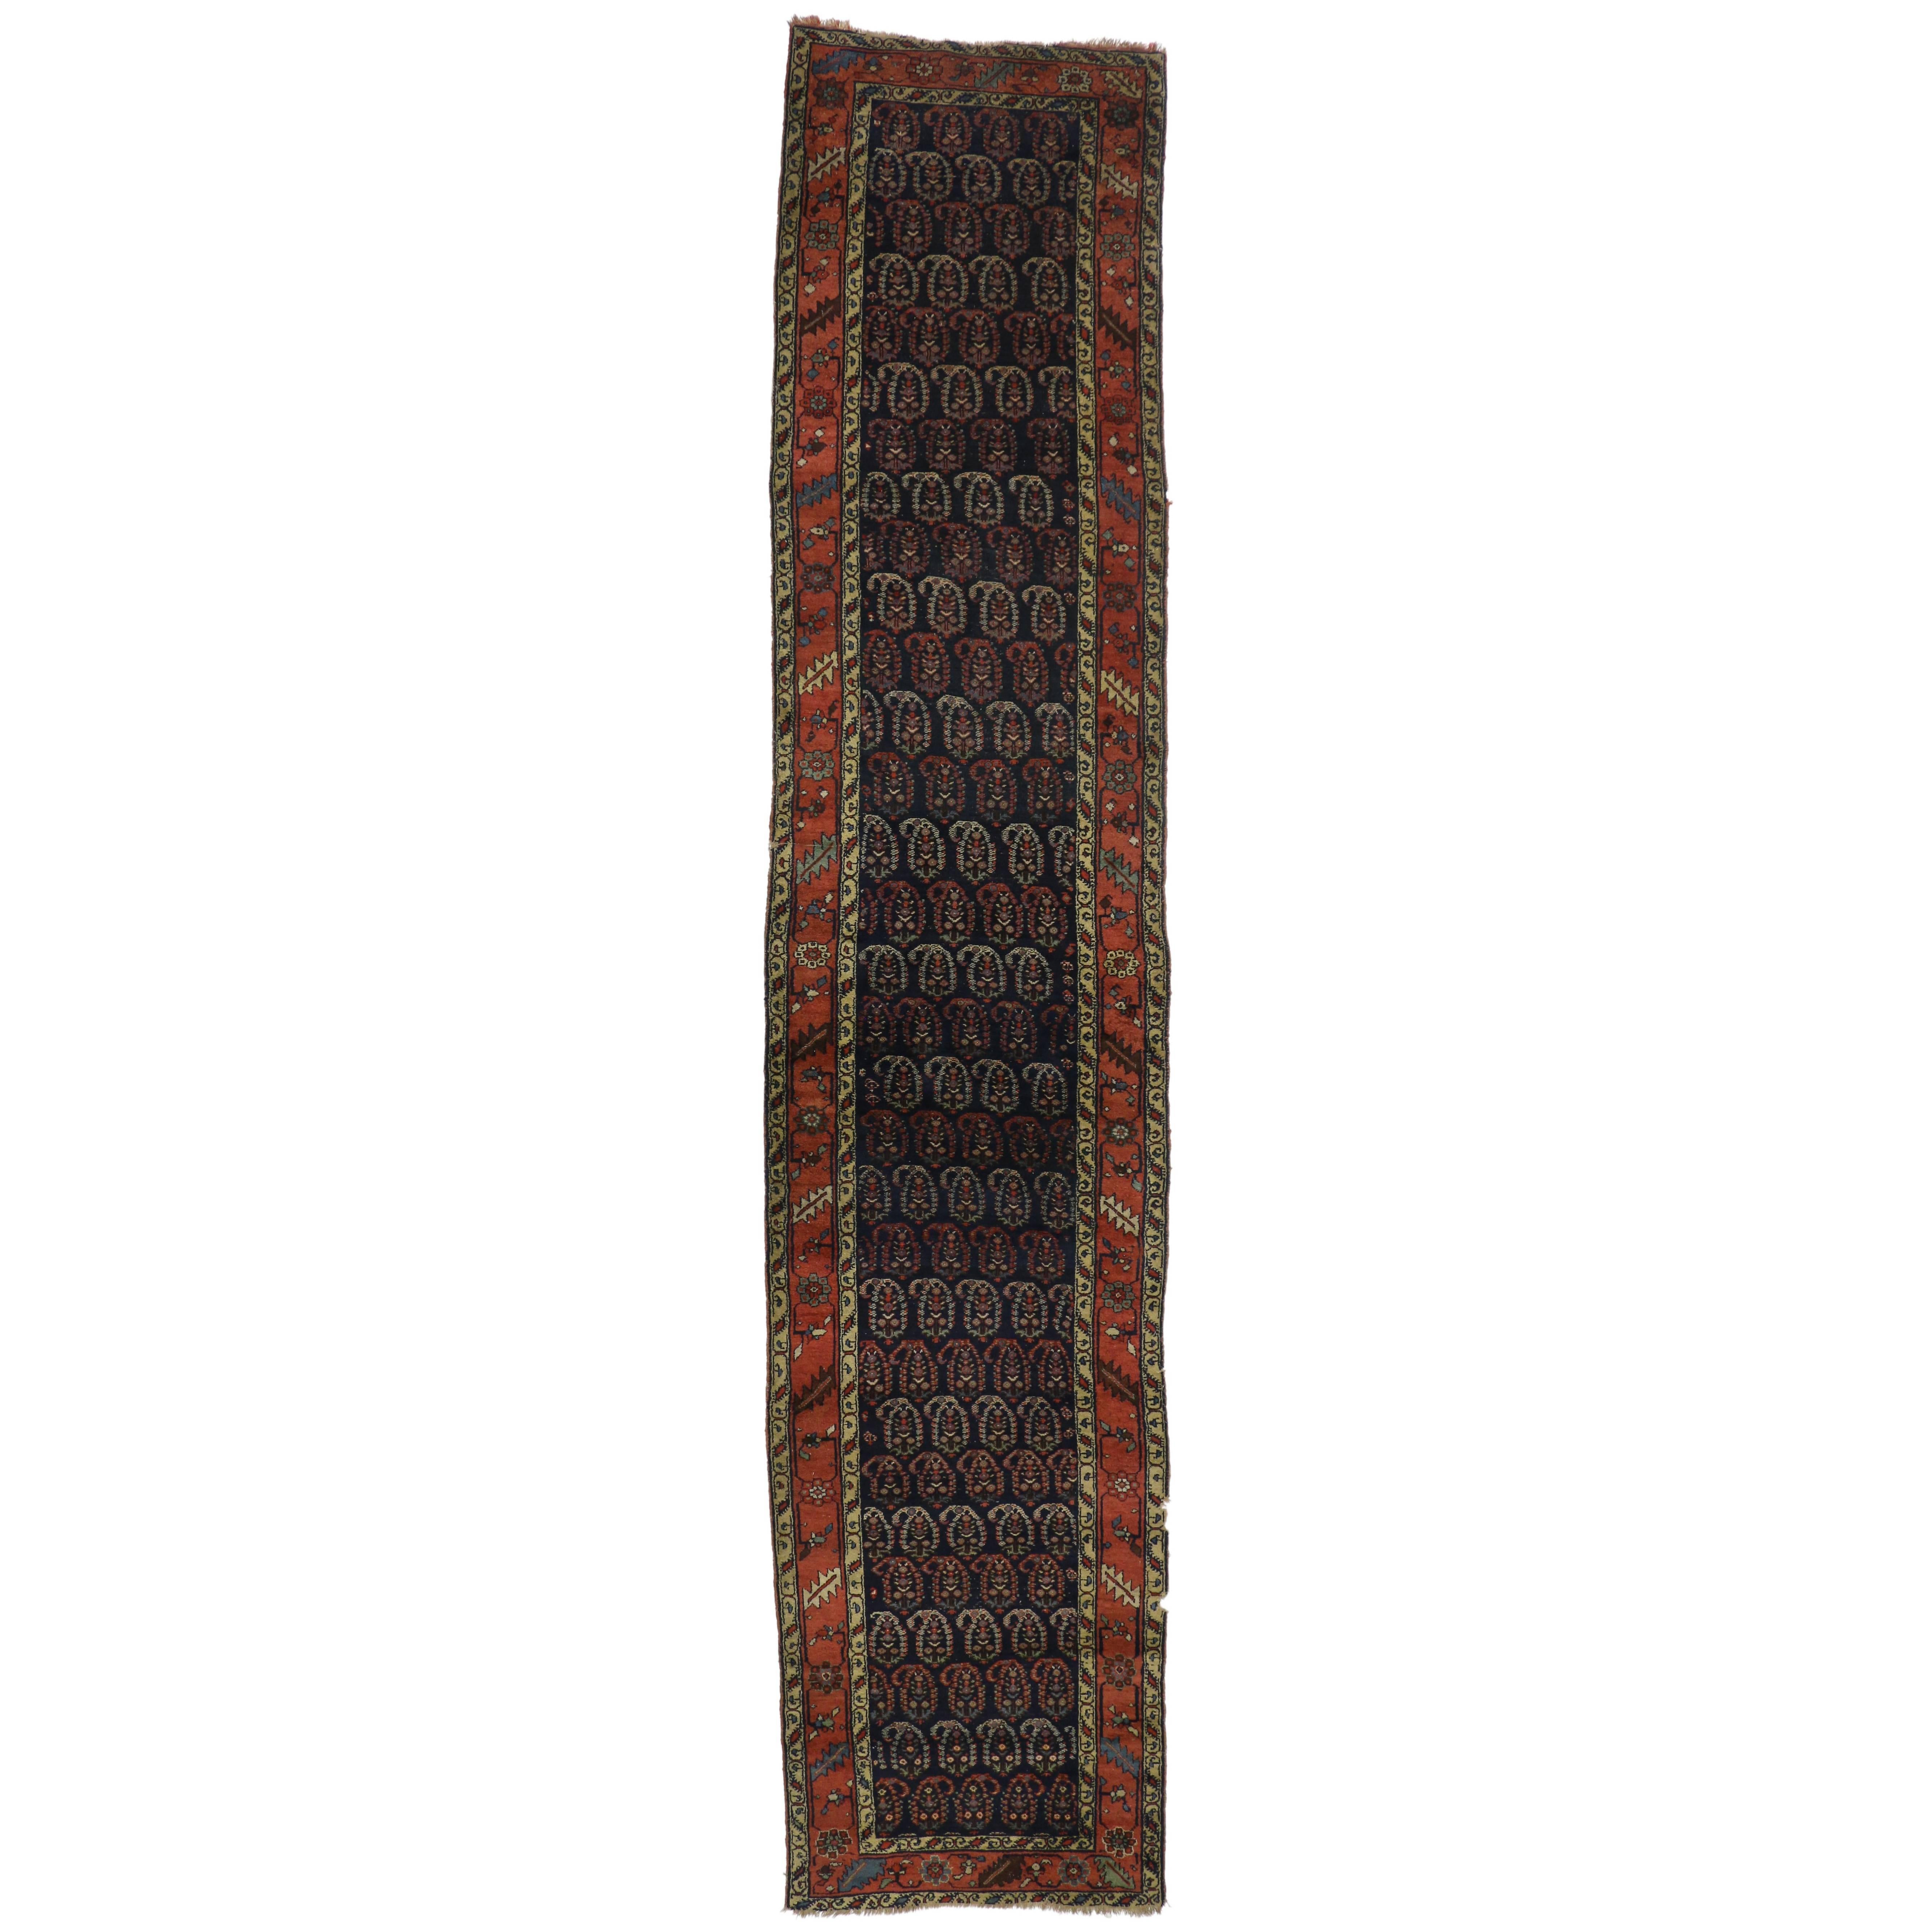 Antique Persian Bijar Runner with Boteh Design and Modern Victorian Style